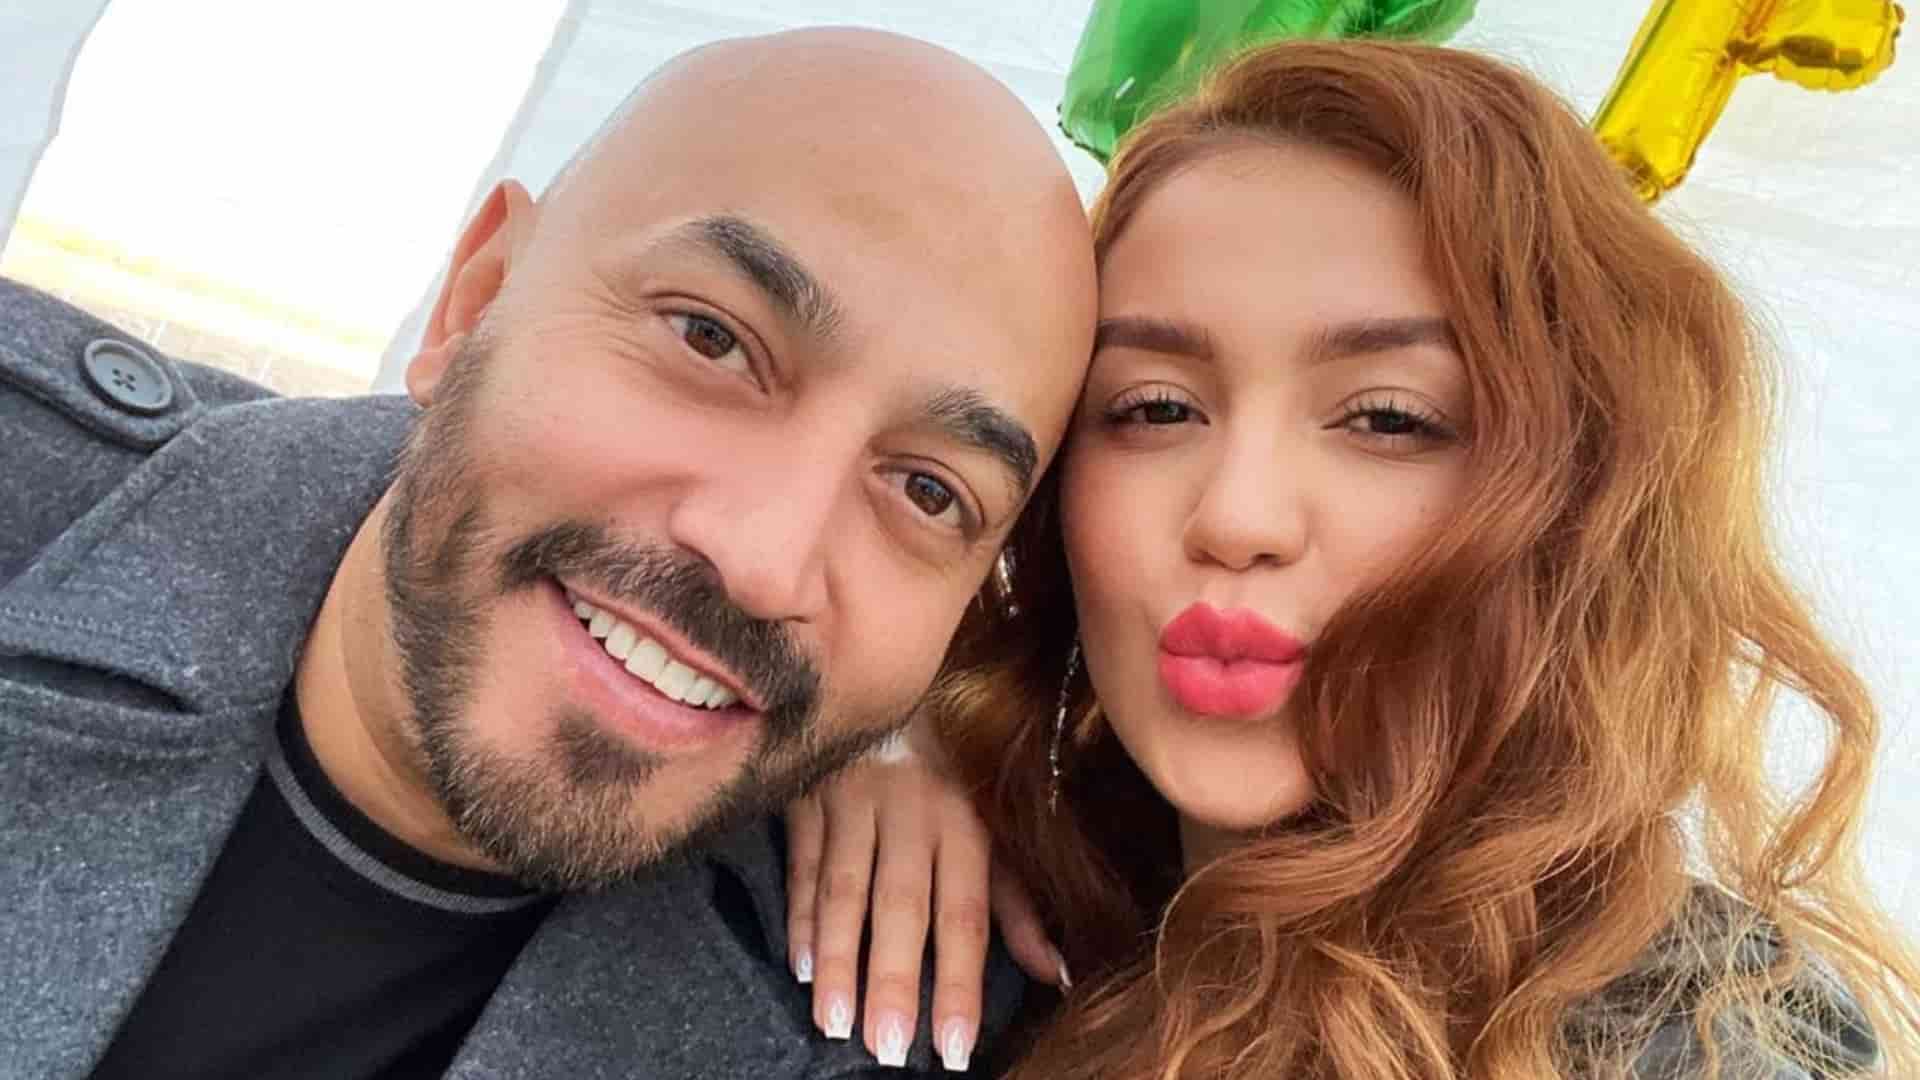 Image of Lupillo Rivera with his wife, Giselle Soto